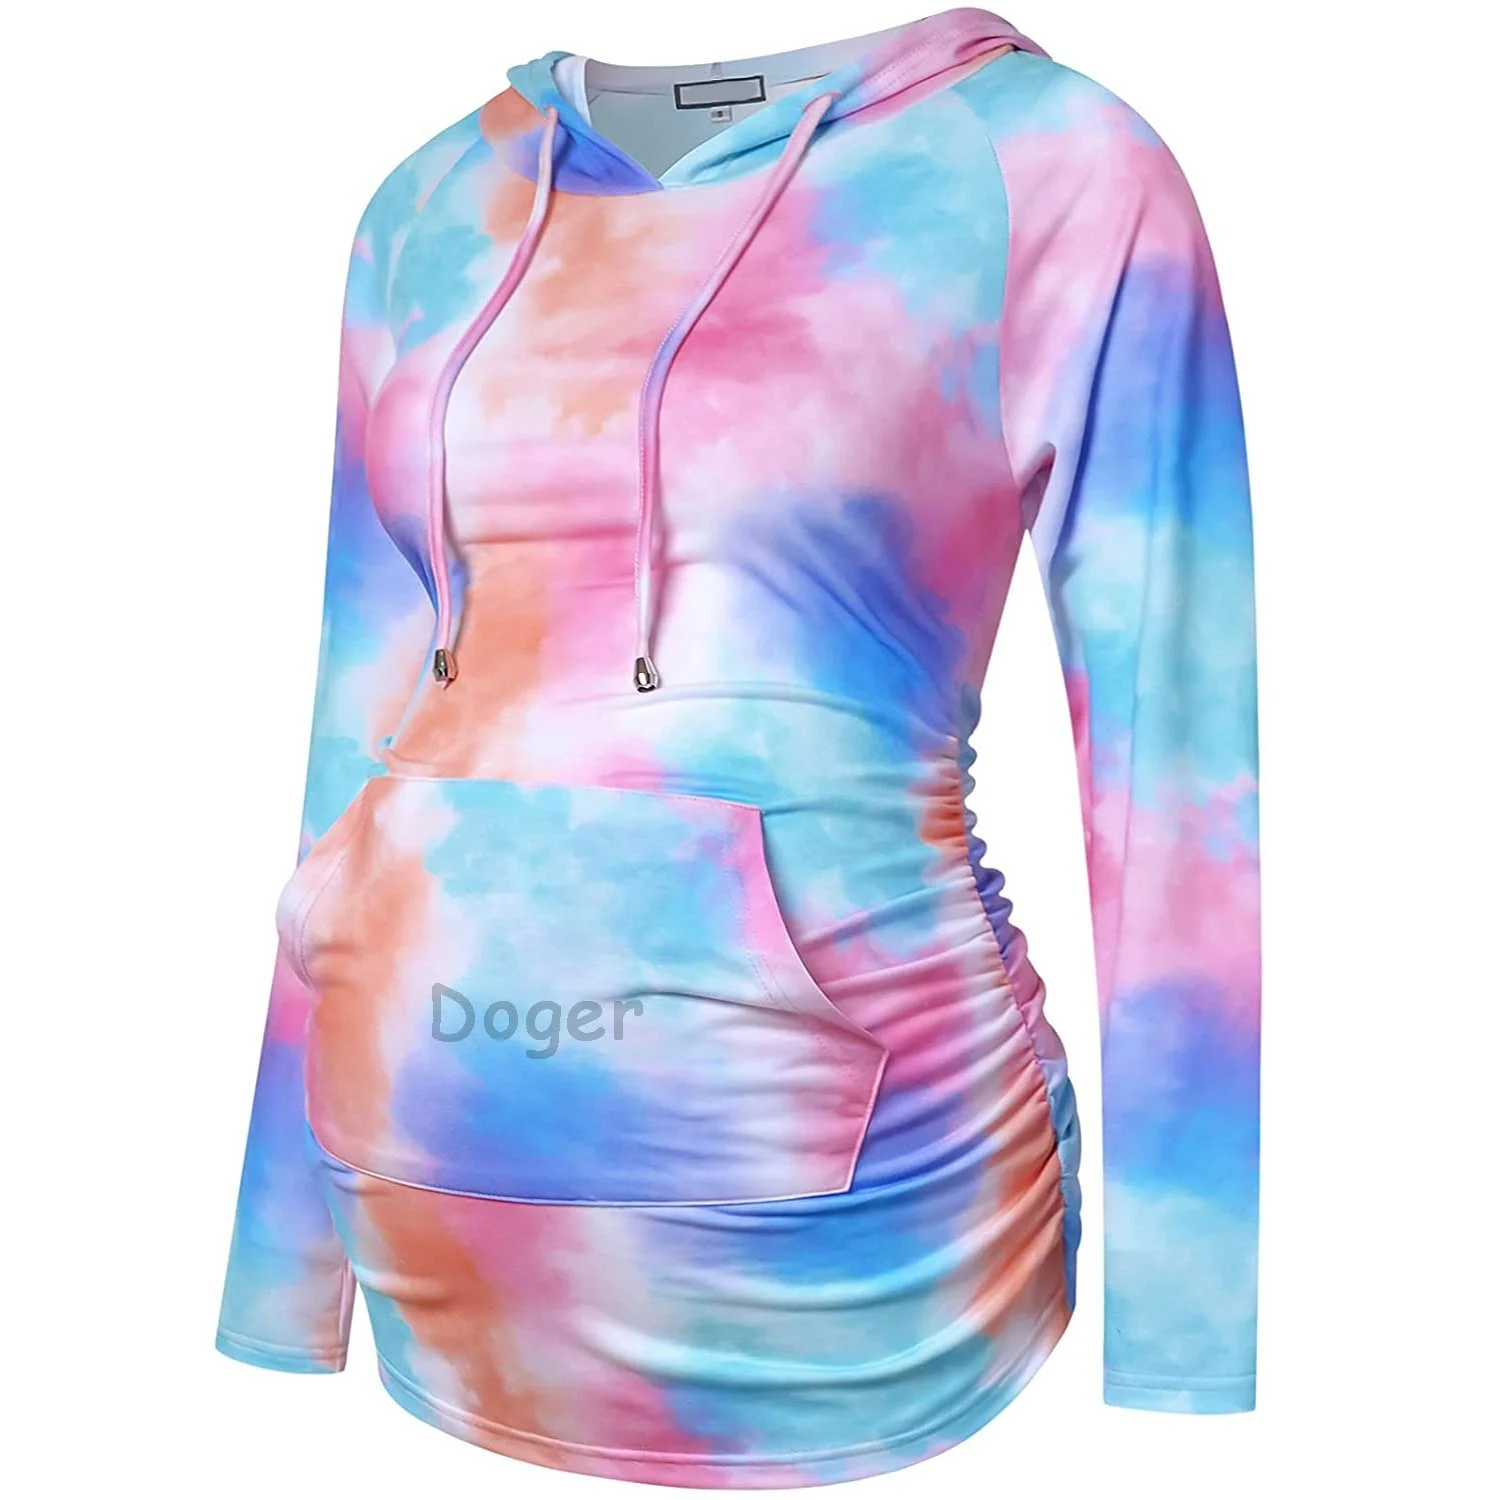 

Custom Women's Skin Care Modal Cotton Hoodie Dress Plus Size Tie Dye Maternity Activewear Hoody Tops Clothes, Customized color